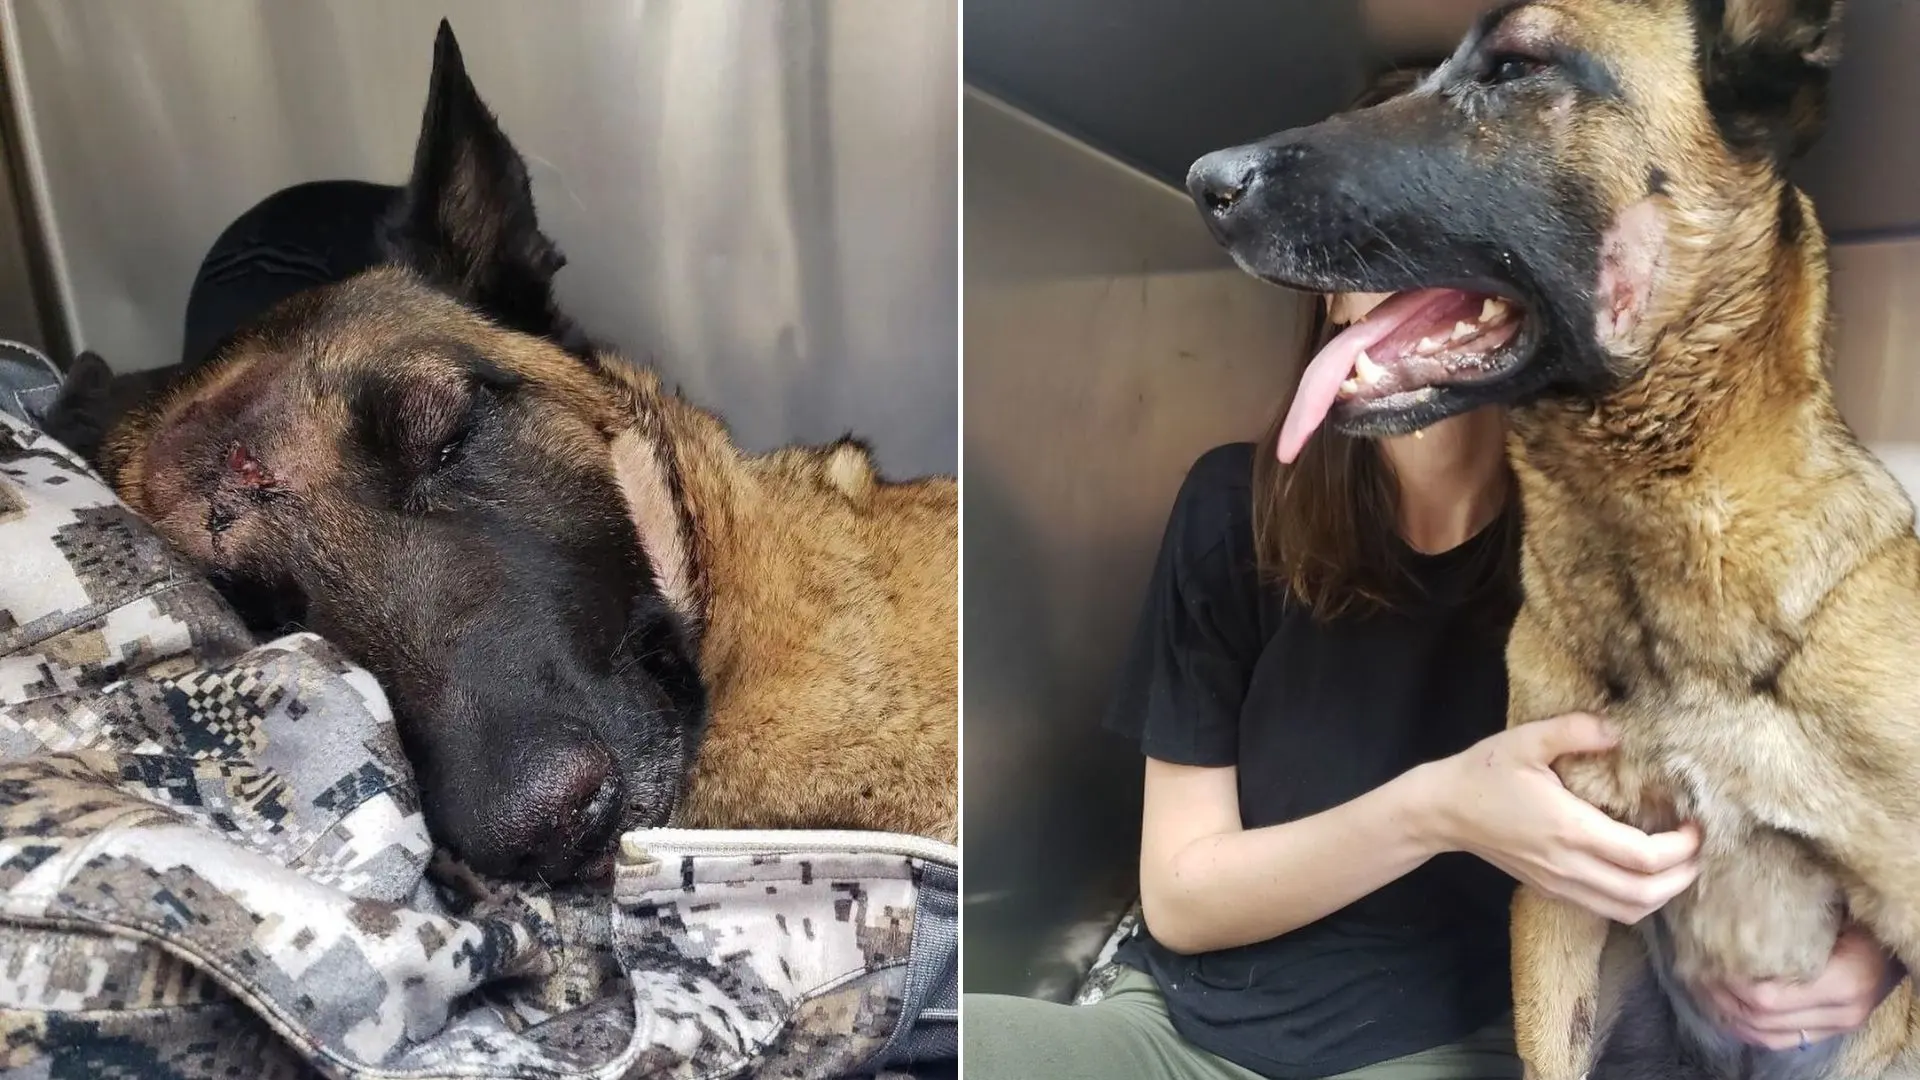 Belgian Malinois, Eva, Saves Her Hooman From A Mountain Lion Attack